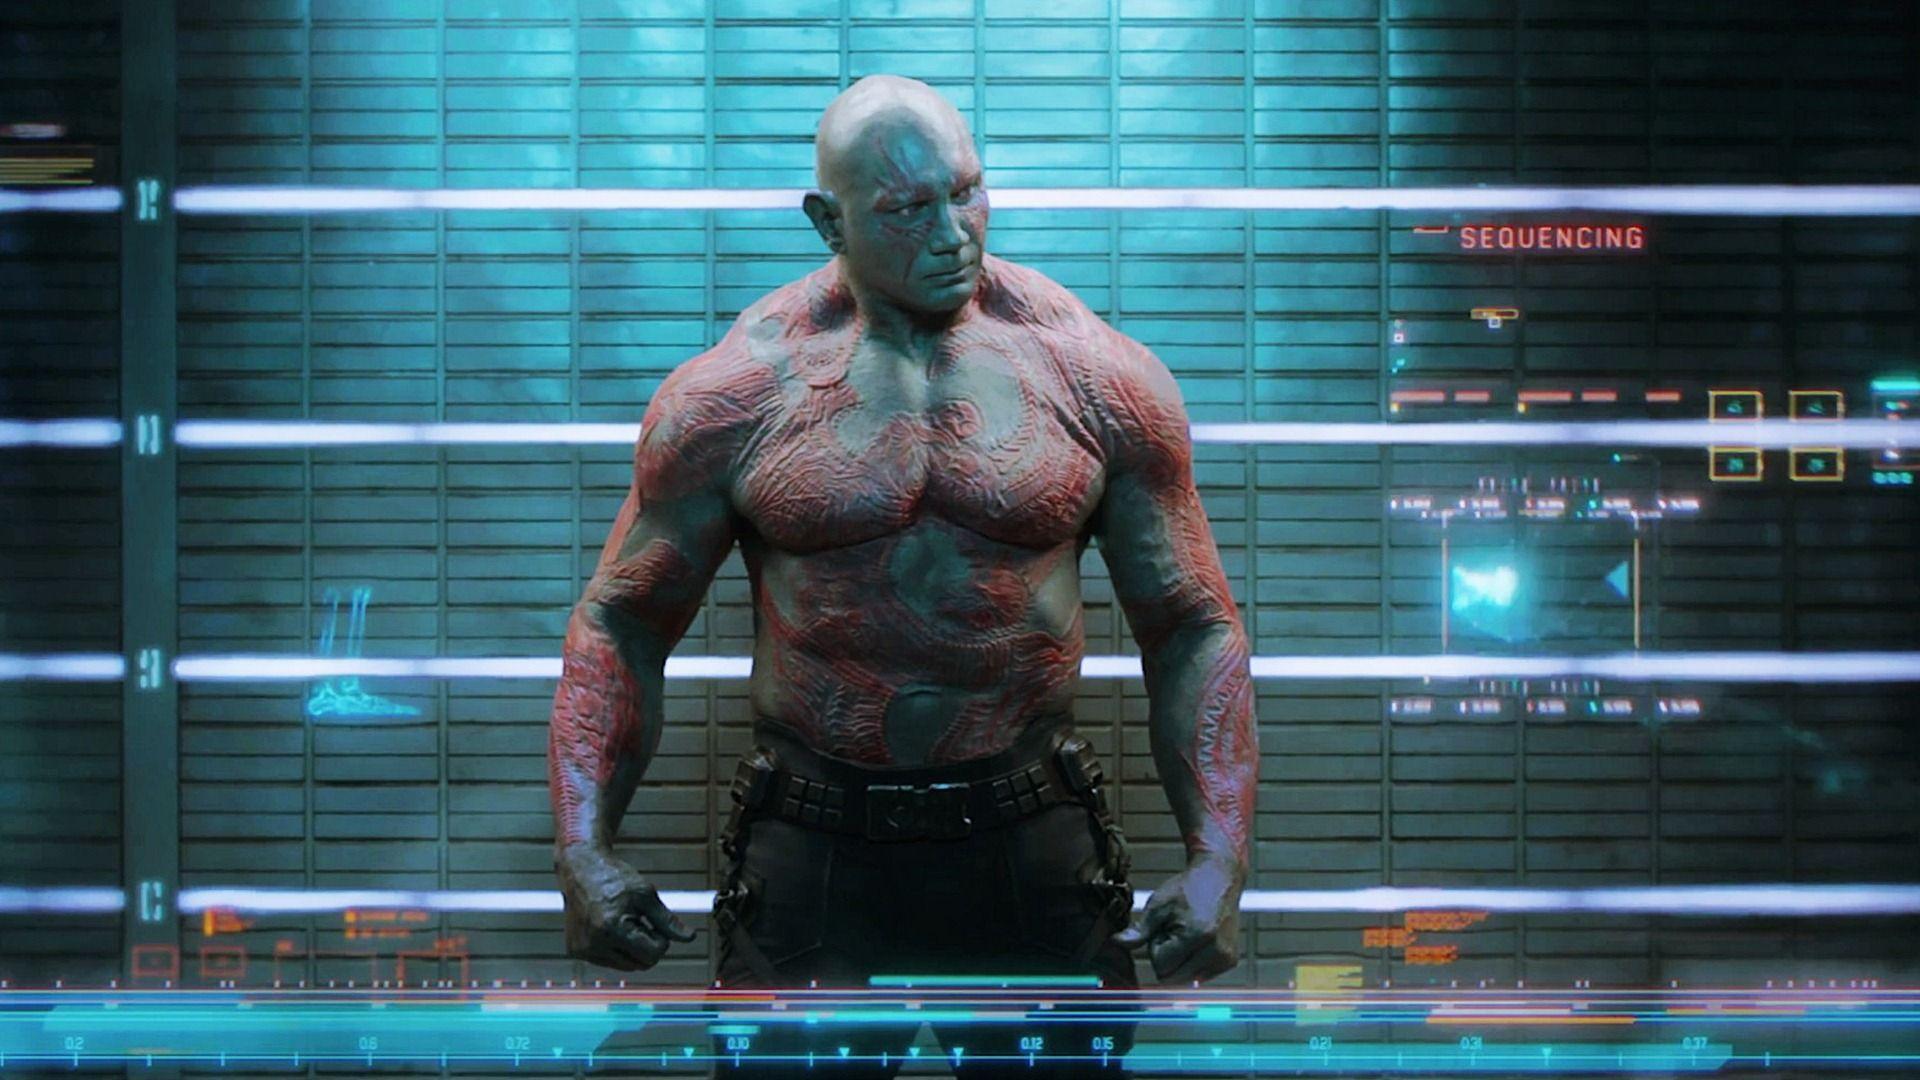 Free download Drax The Destroyer Wallpaper HD Background Image Pics Photo [1920x1080] for your Desktop, Mobile & Tablet. Explore Drax The Destroyer Wallpaper. Drax The Destroyer Wallpaper, Drax Wallpaper